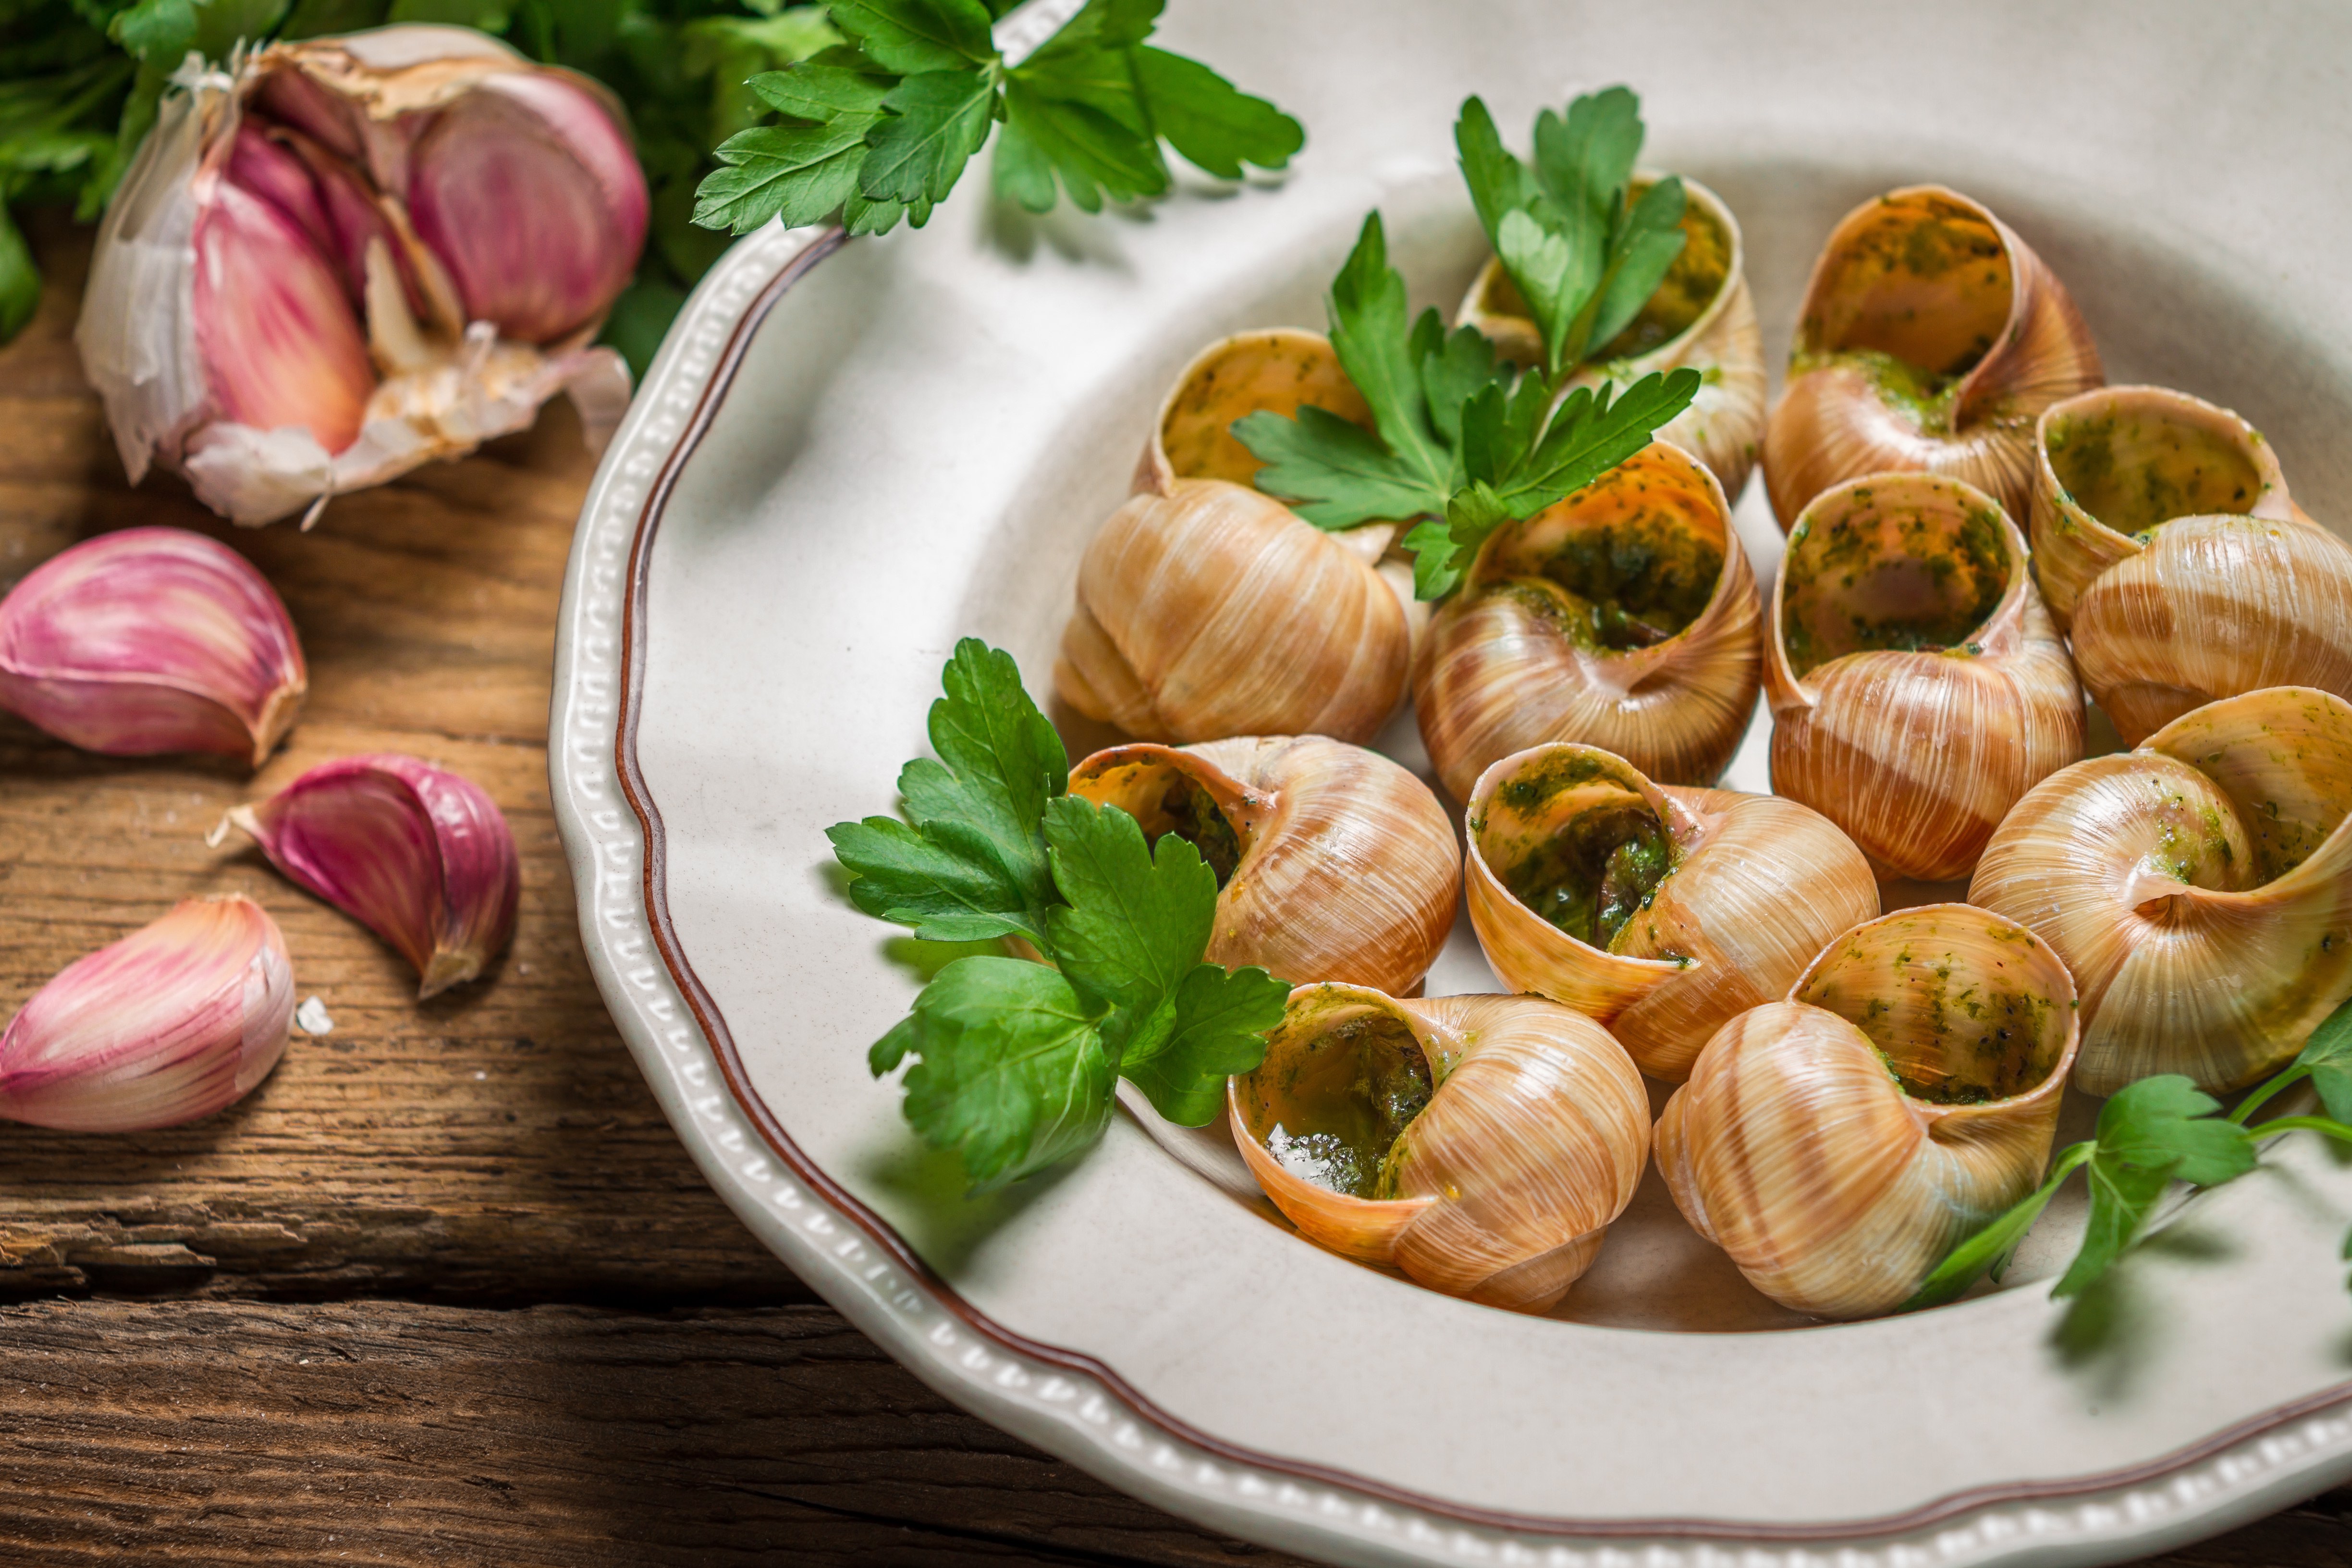 Snails baked in garlic butter and served with parsley